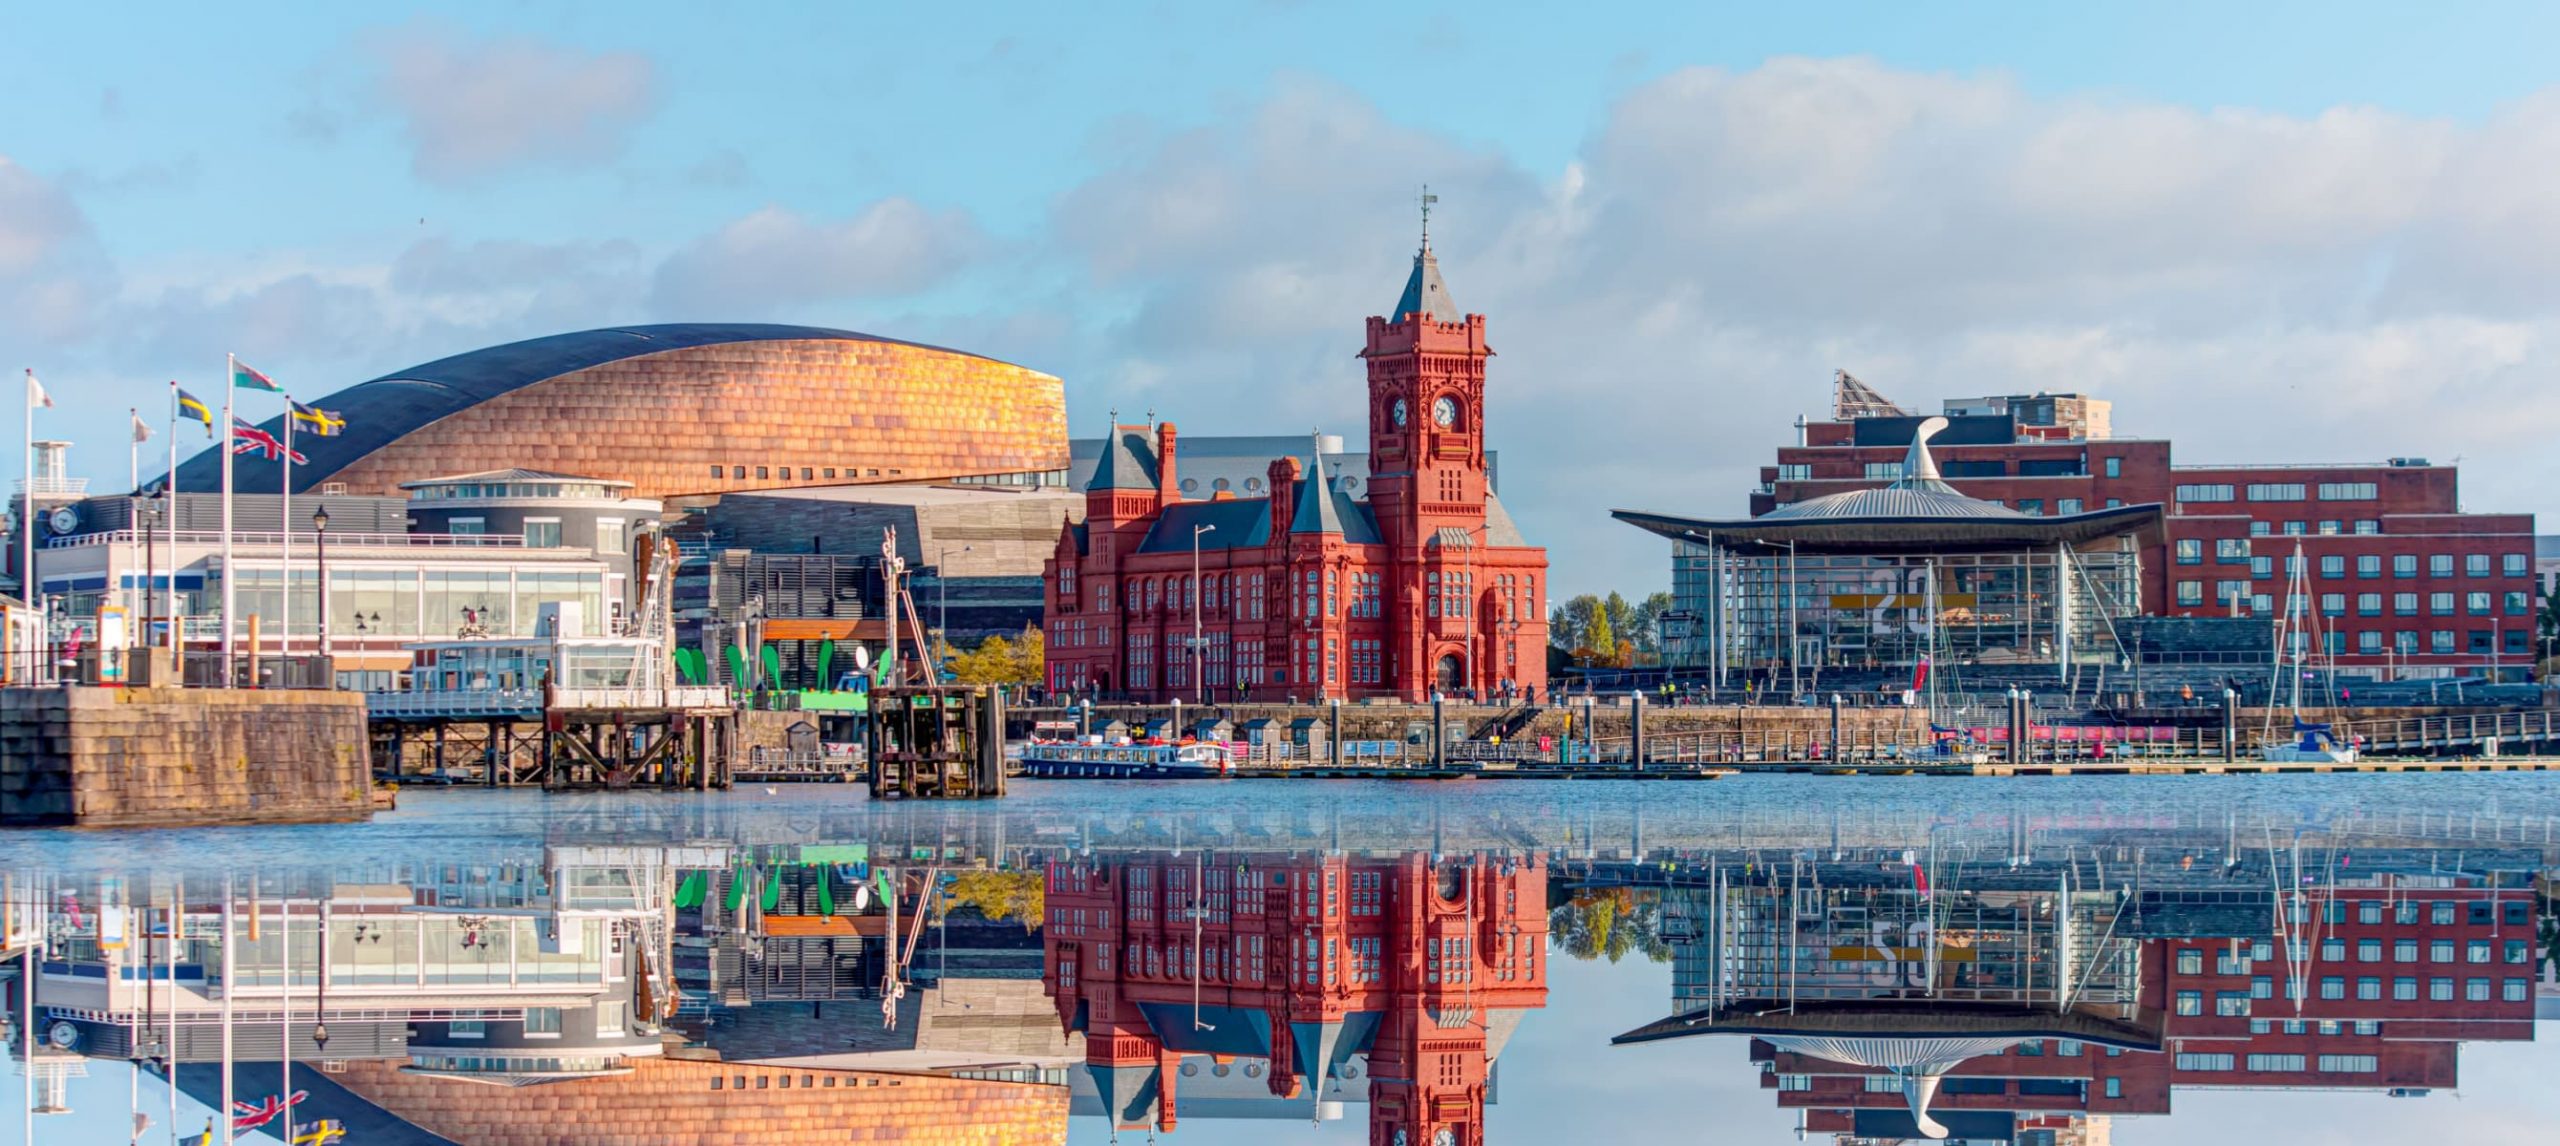 7 Best Things To Do In Cardiff, Wales